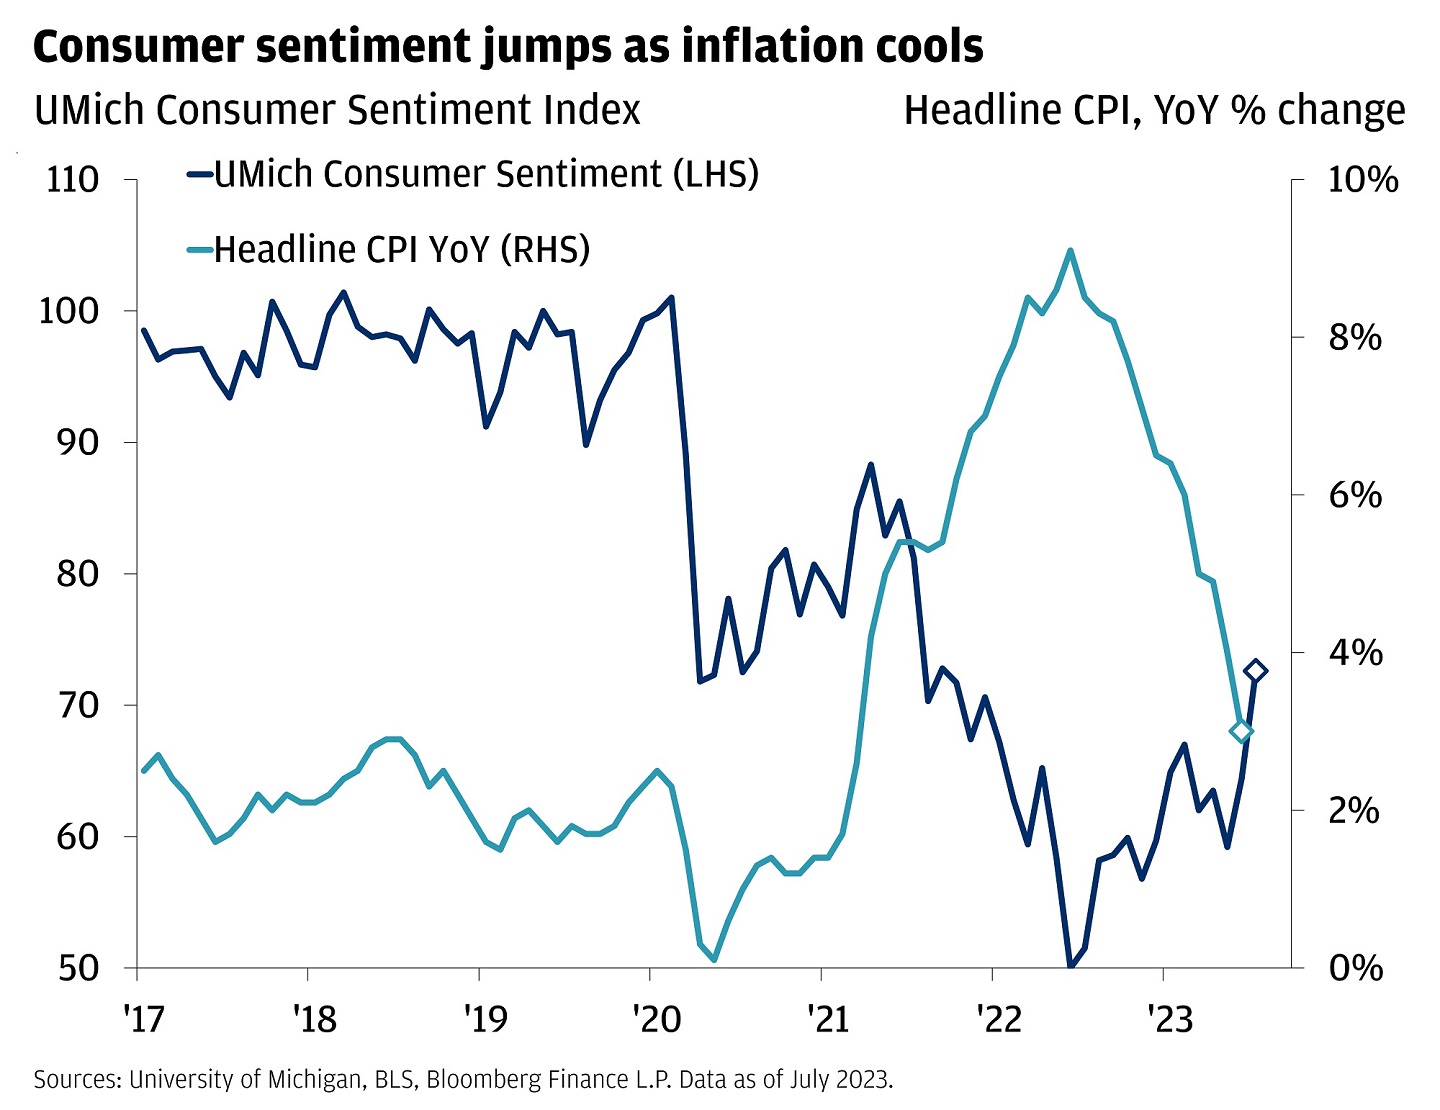 This chart describes consumer sentiment and inflation using the UMich Consumer Sentiment Index and the headline CPI, year-over-year percentage change data.